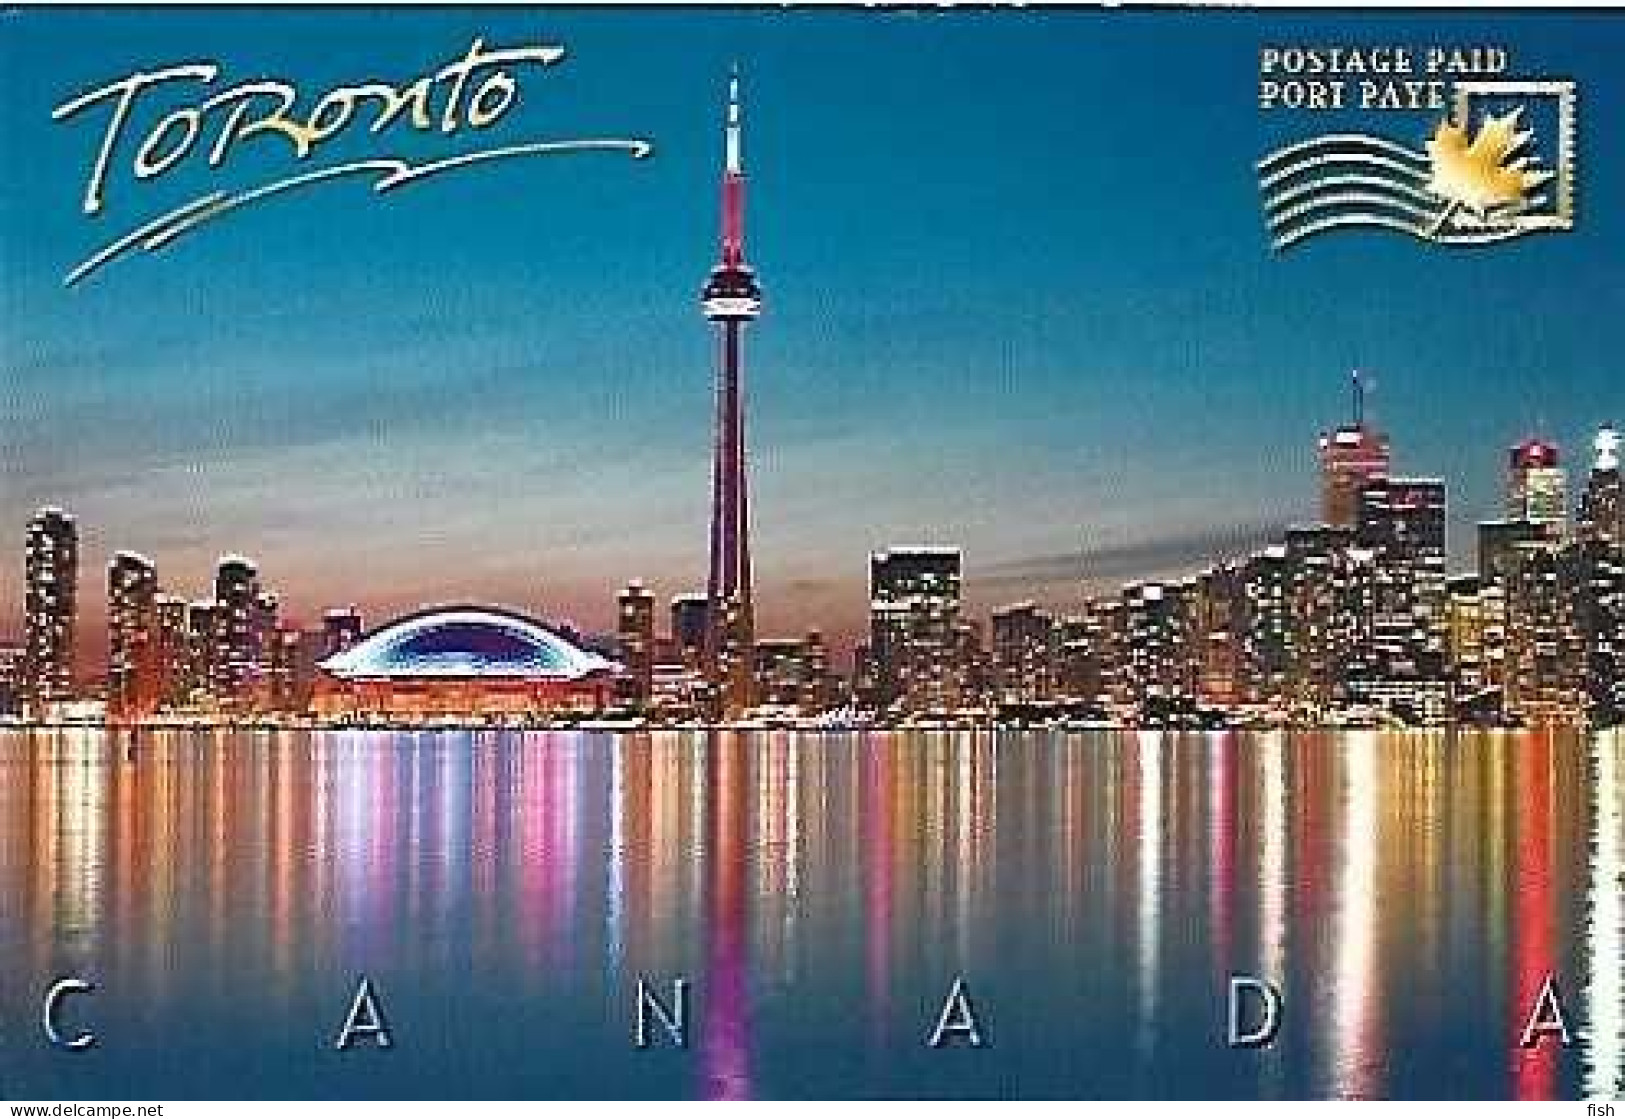 Canada ** & Postage Paid, Toronto, Canada Natural Beauty Post Card Factory (768888) - Toronto